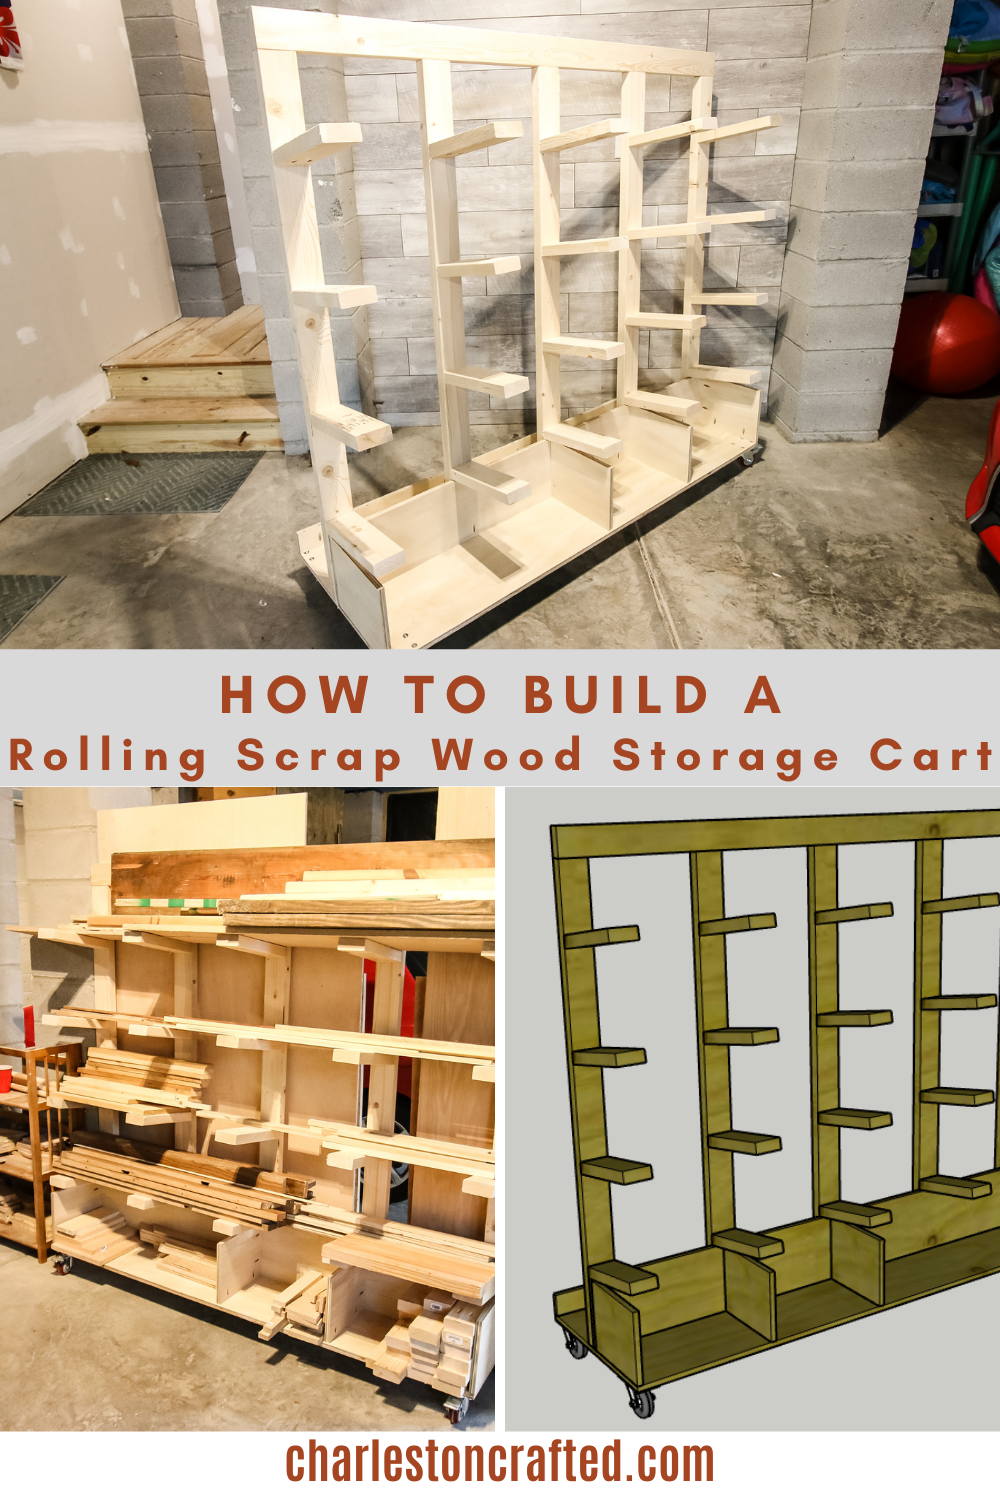 How to build a rolling scrap wood storage cart - Charleston Crafted